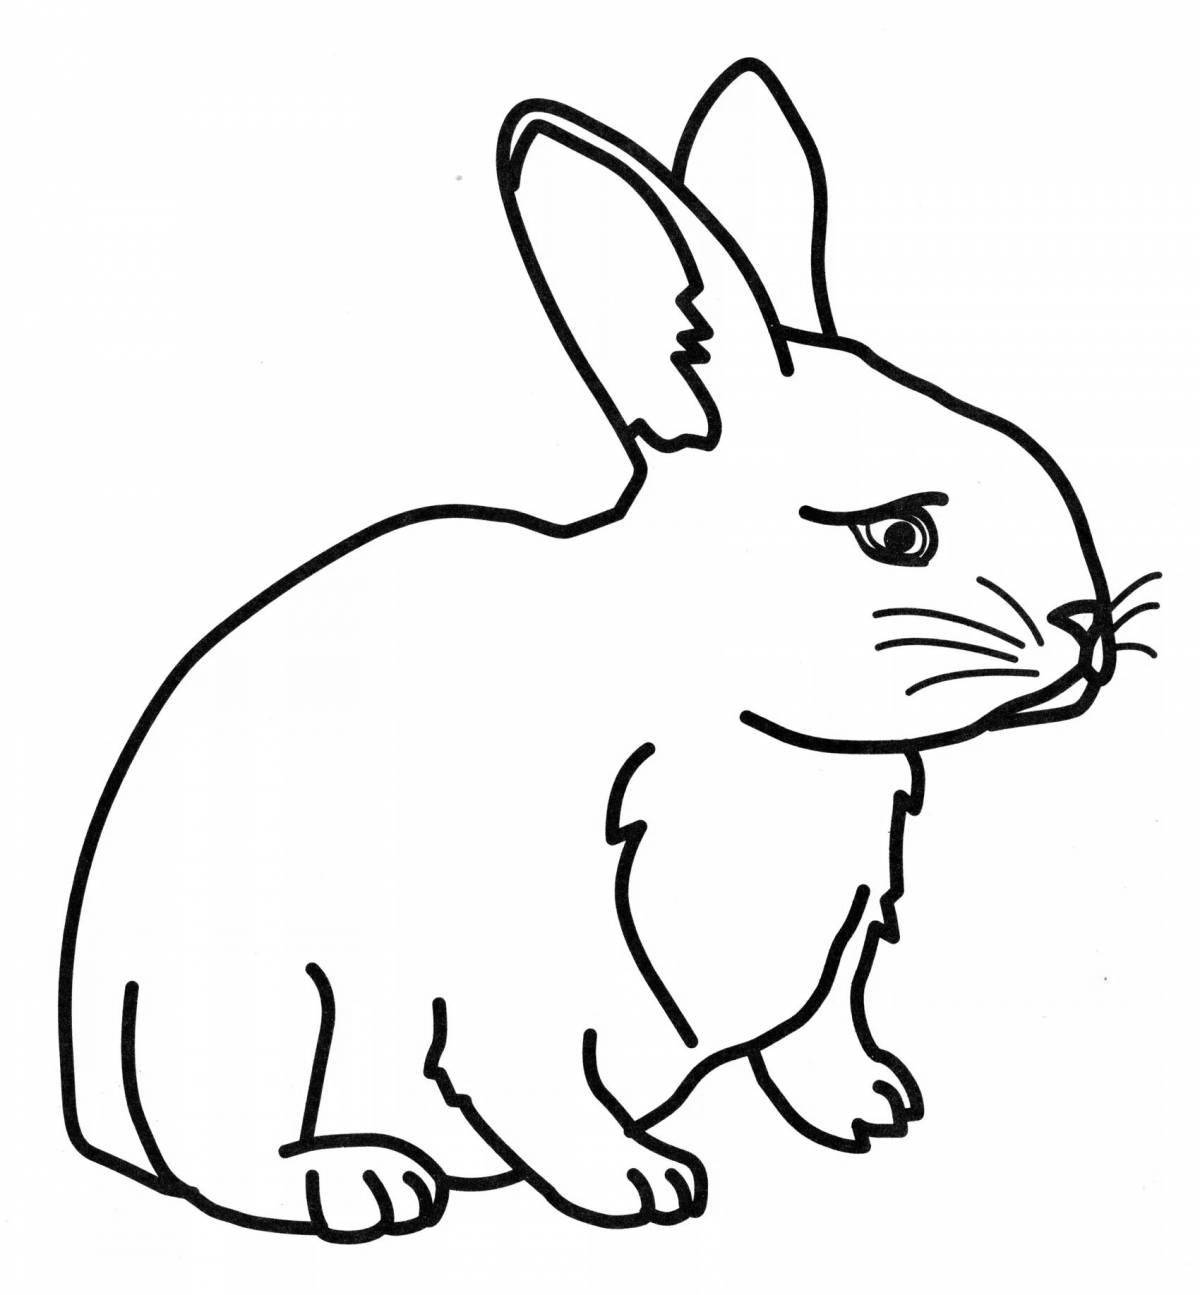 Coloring page affectionate rabbit and cat